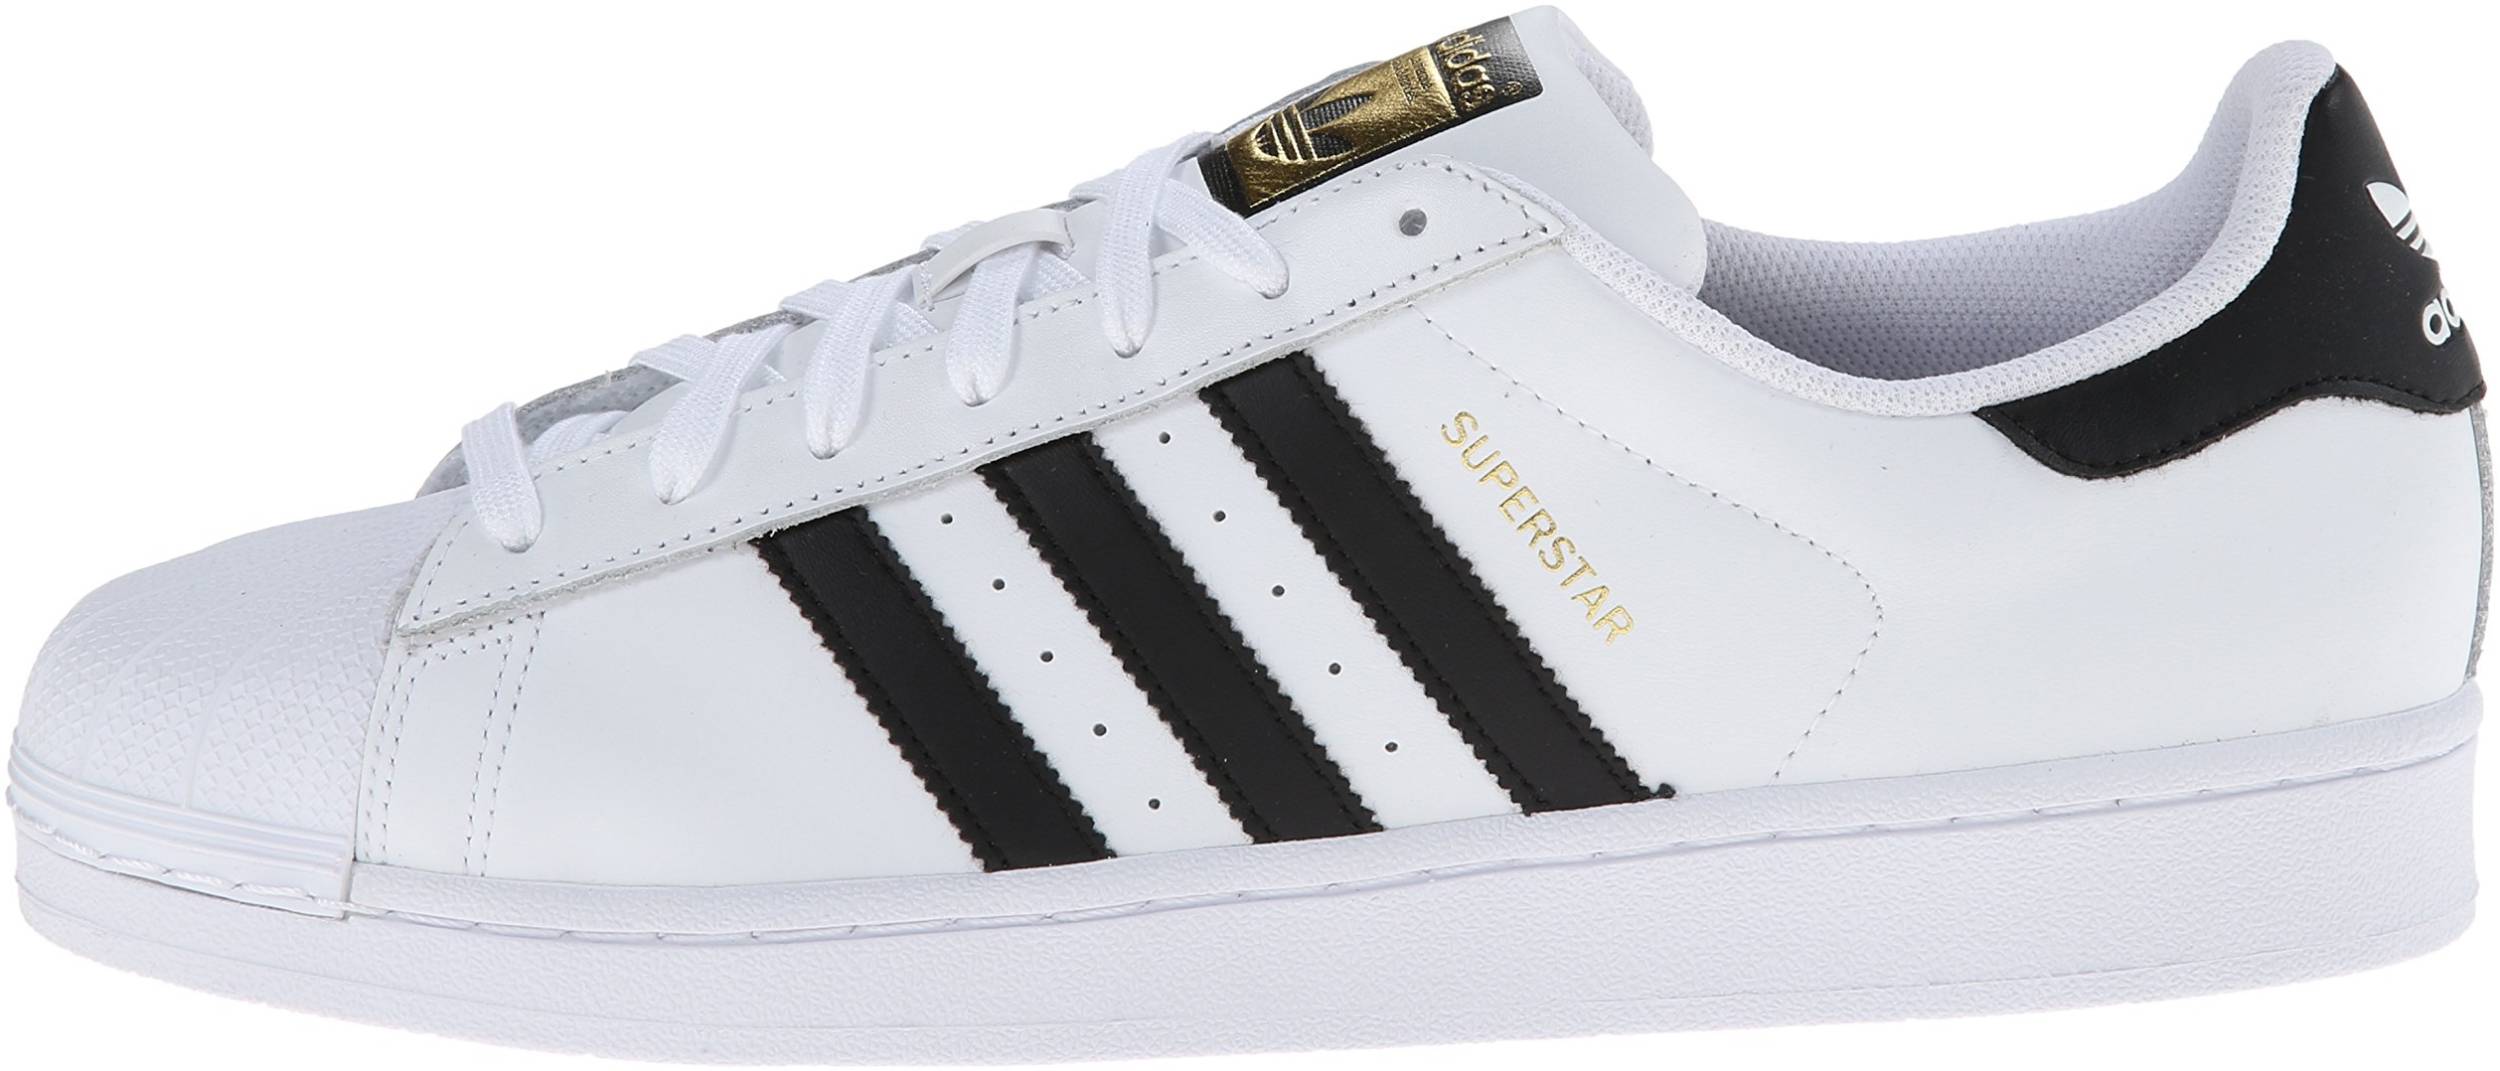 Excuse me Aspire violence 80+ colors of Adidas Superstar (from $27) | RunRepeat